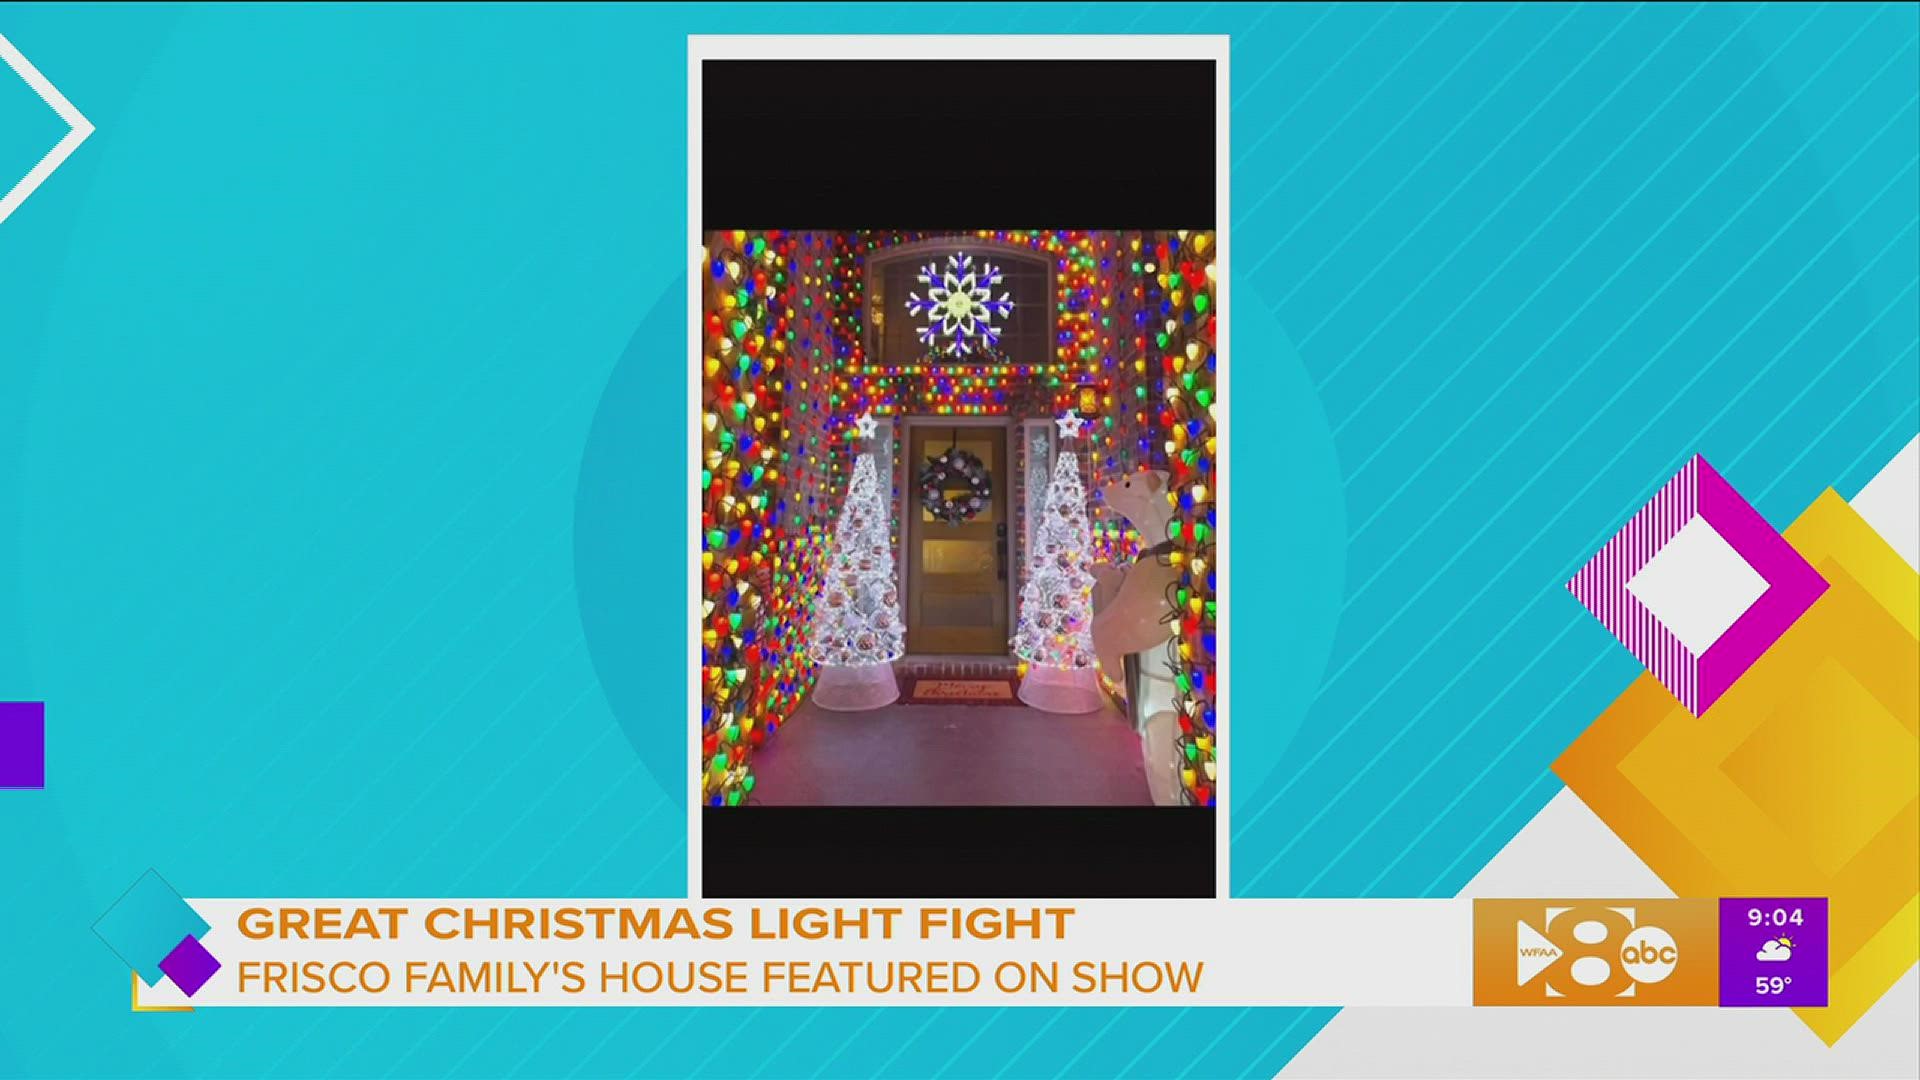 We chatted with the Frisco Family about their magical home and how their home will be featured on "Great Christmas Light Fight".